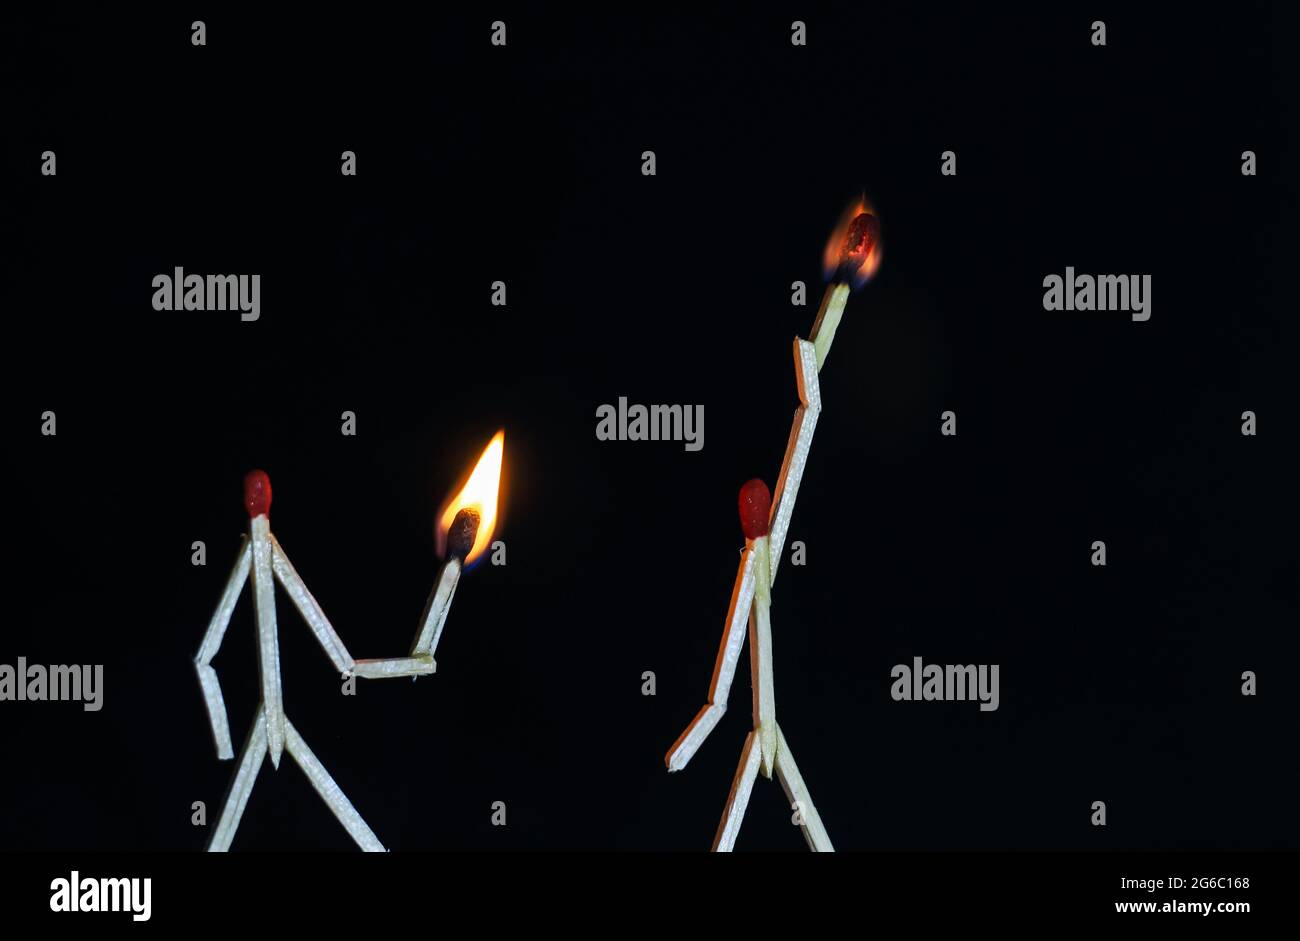 A miniature art with matches that depicts the story of two fighters fighting. Matchstick men fighting each other. Matchstick art photography. Stock Photo